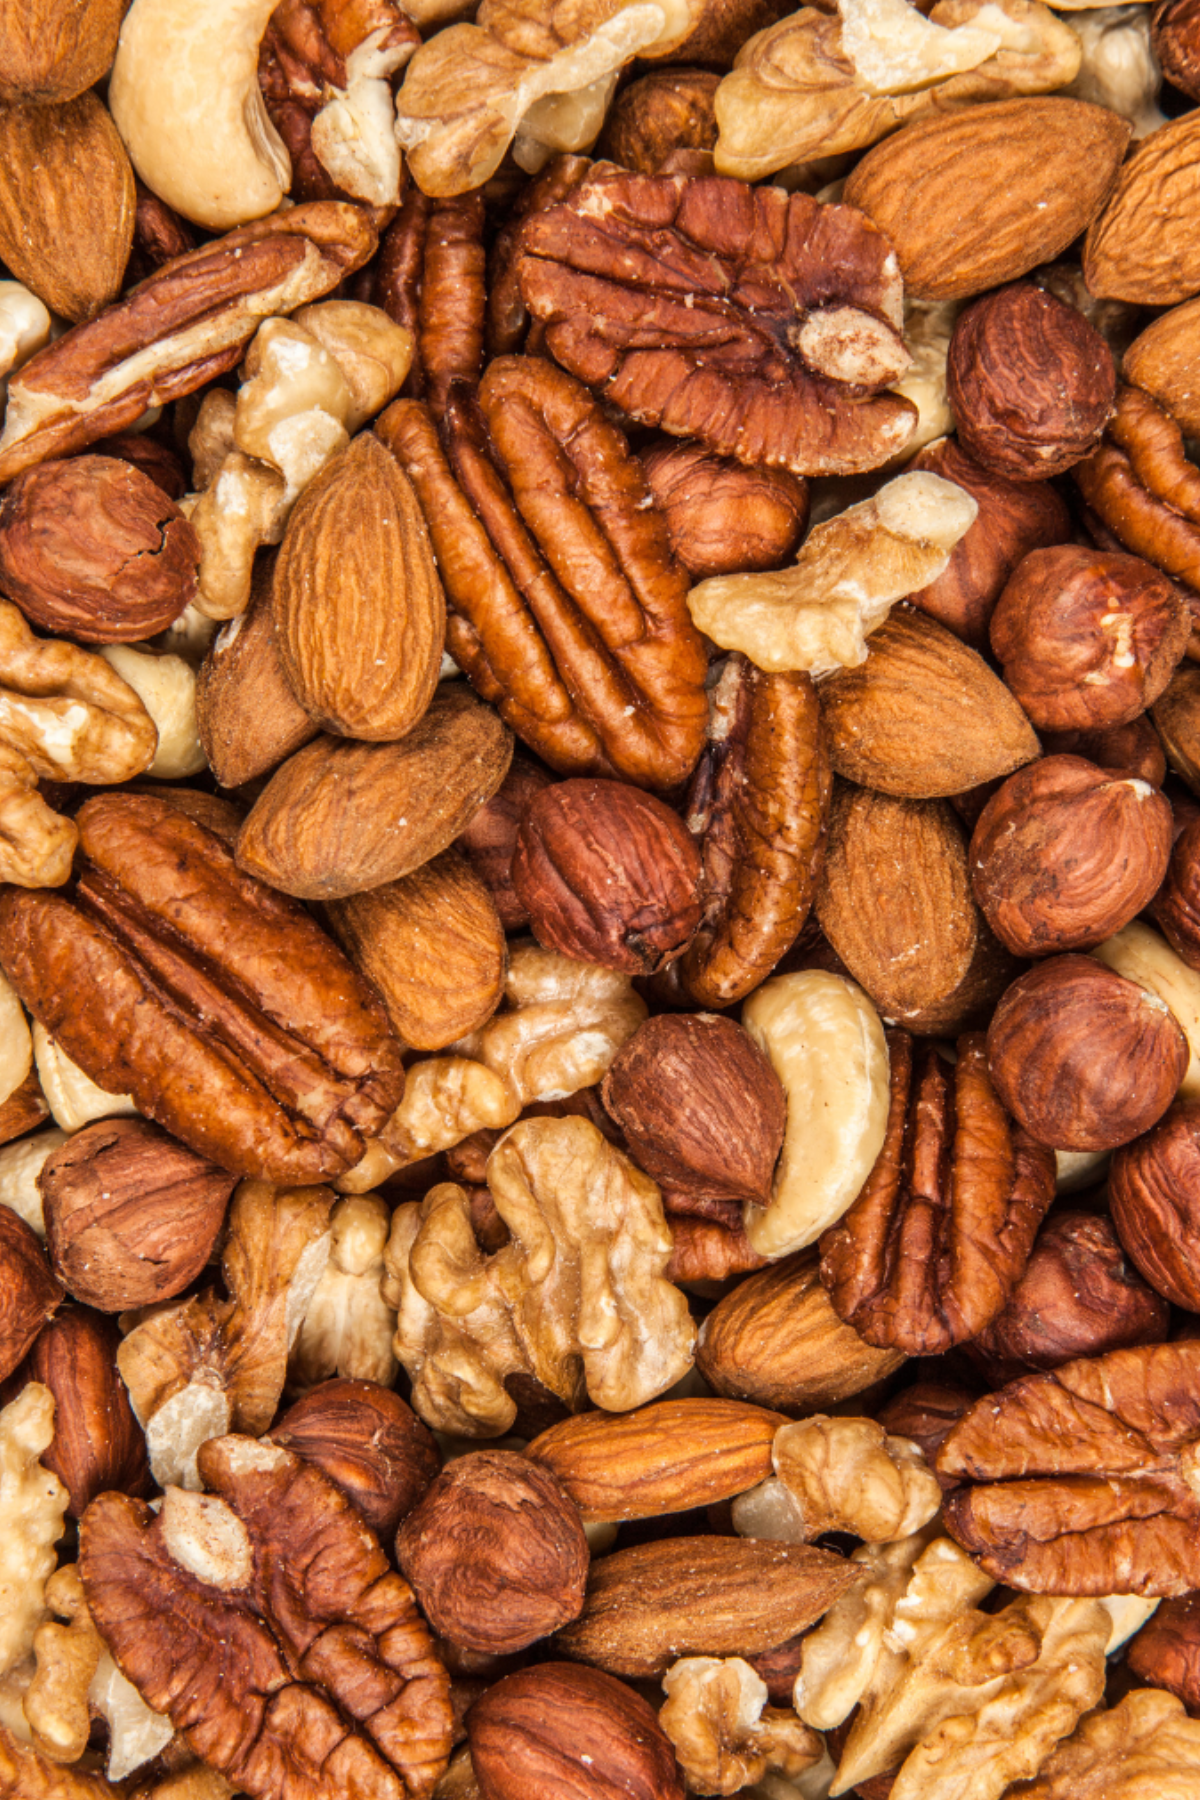 A close up image of a pile of nuts, a plant-based protein.